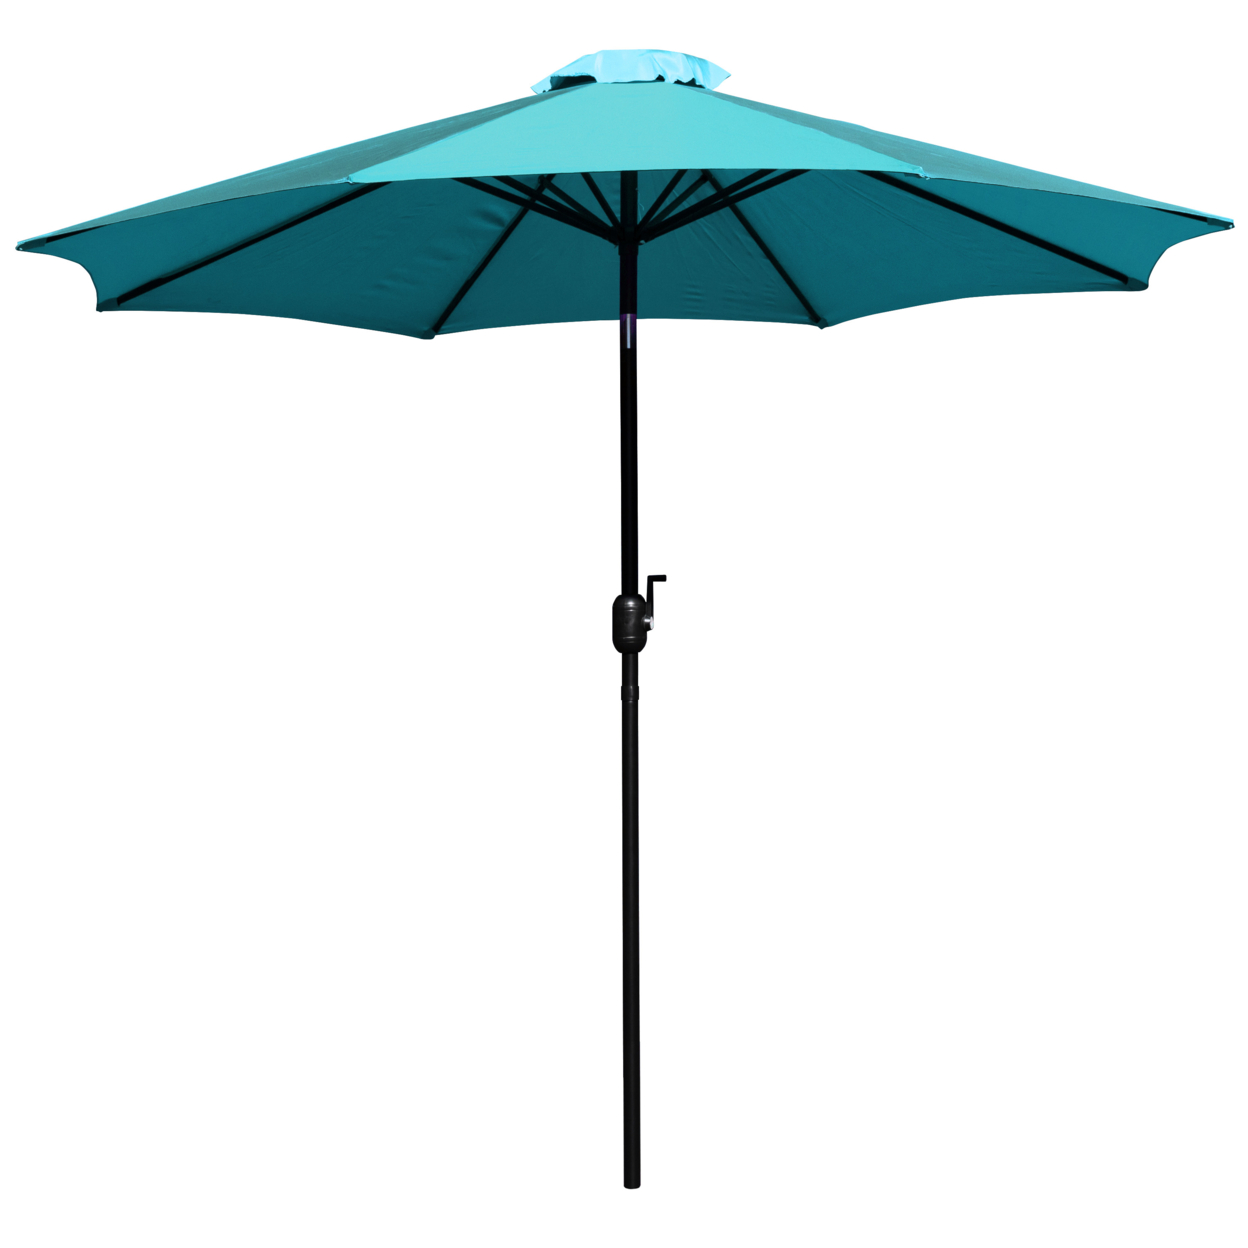 Teal 9 FT Round Umbrella With 1.5 Diameter Aluminum Pole With Crank And Tilt Function